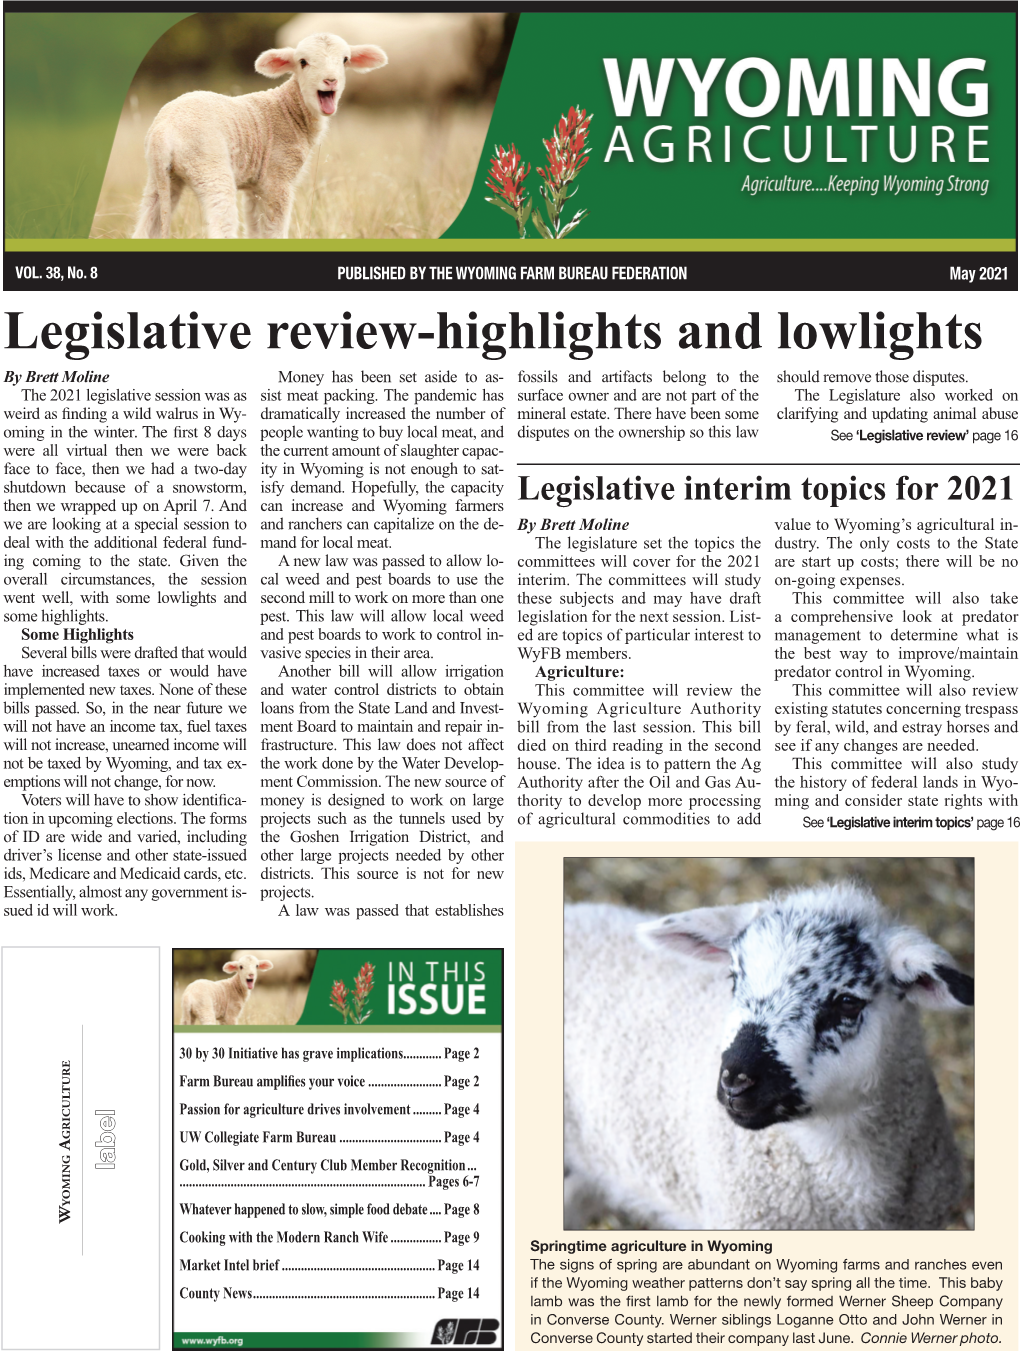 May 2021 Legislative Review-Highlights and Lowlights by Brett Moline Money Has Been Set Aside to As- Fossils and Artifacts Belong to the Should Remove Those Disputes